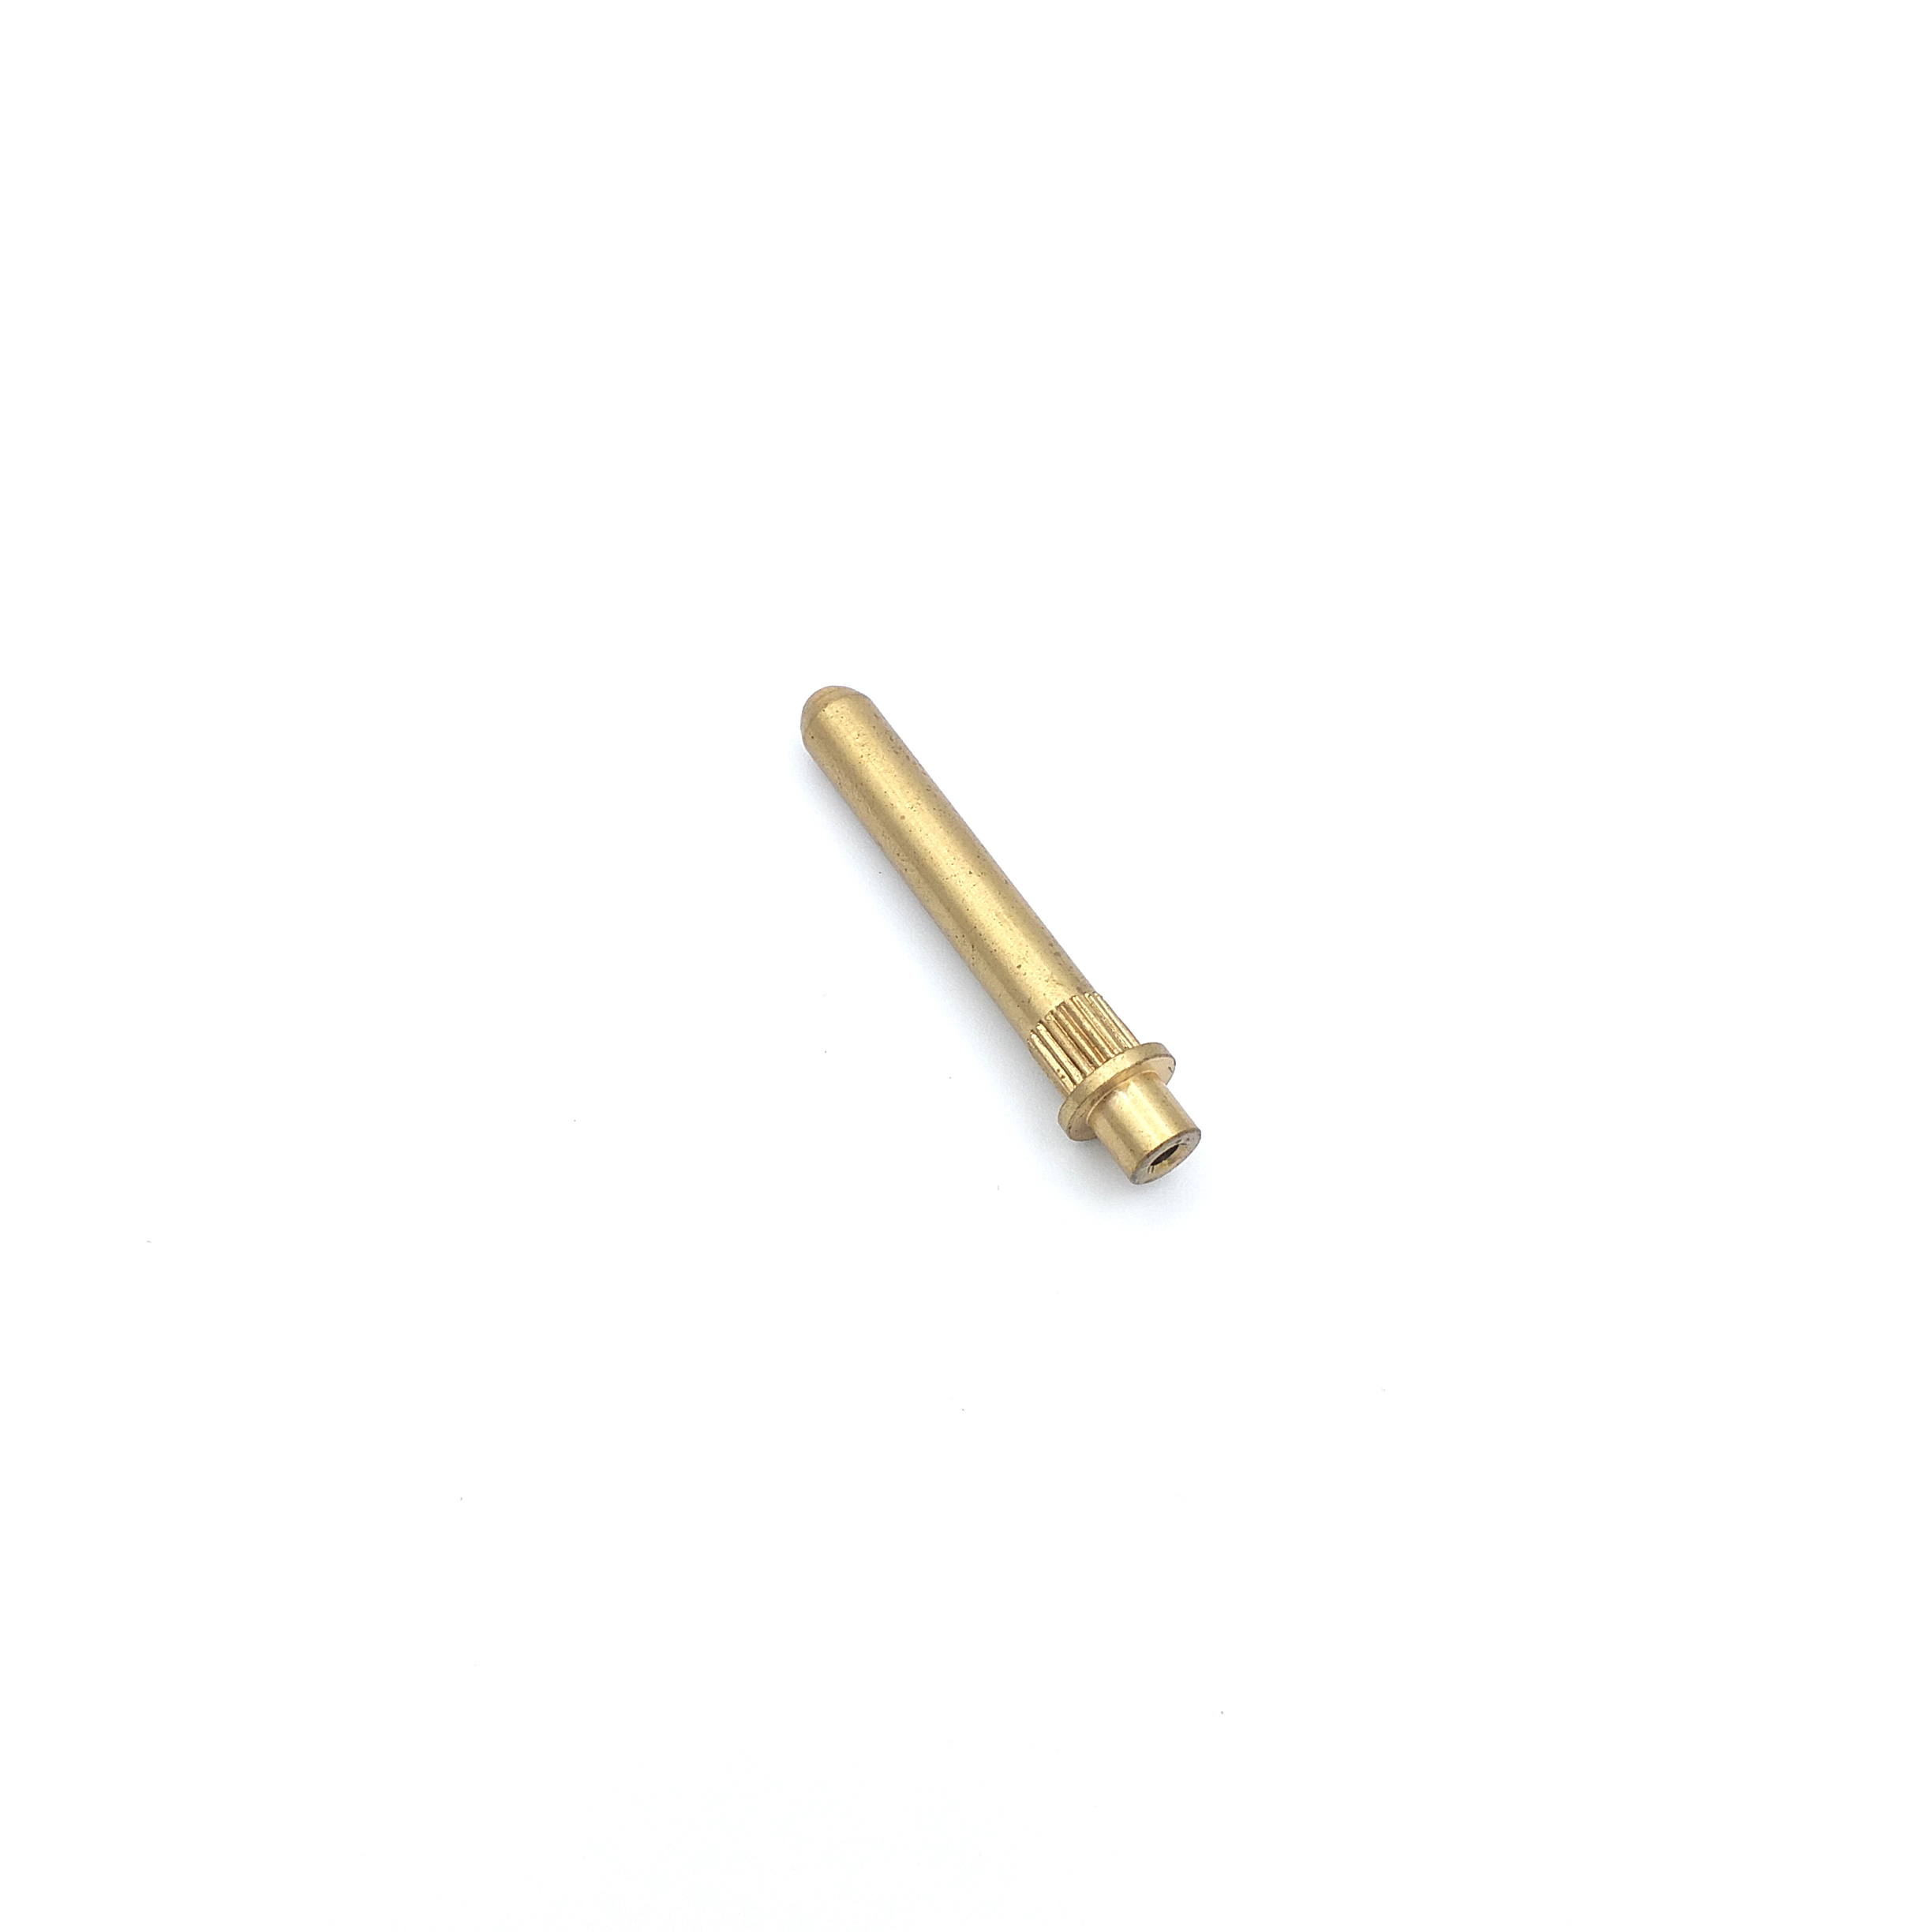 Brass spring socket for a pin